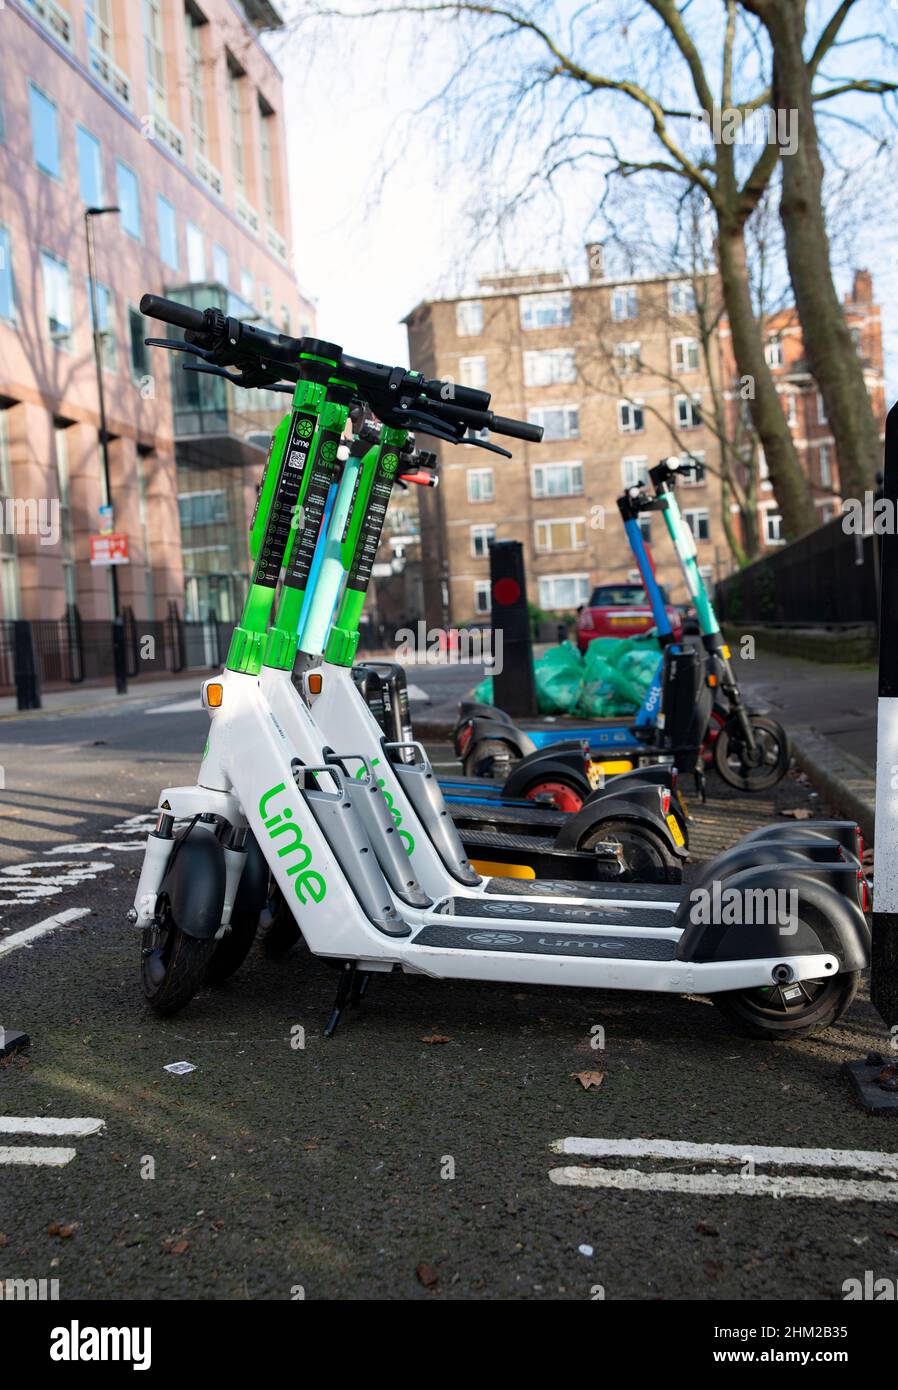 London, UK - January 12th 2022: Electric scooters for rent Stock Photo